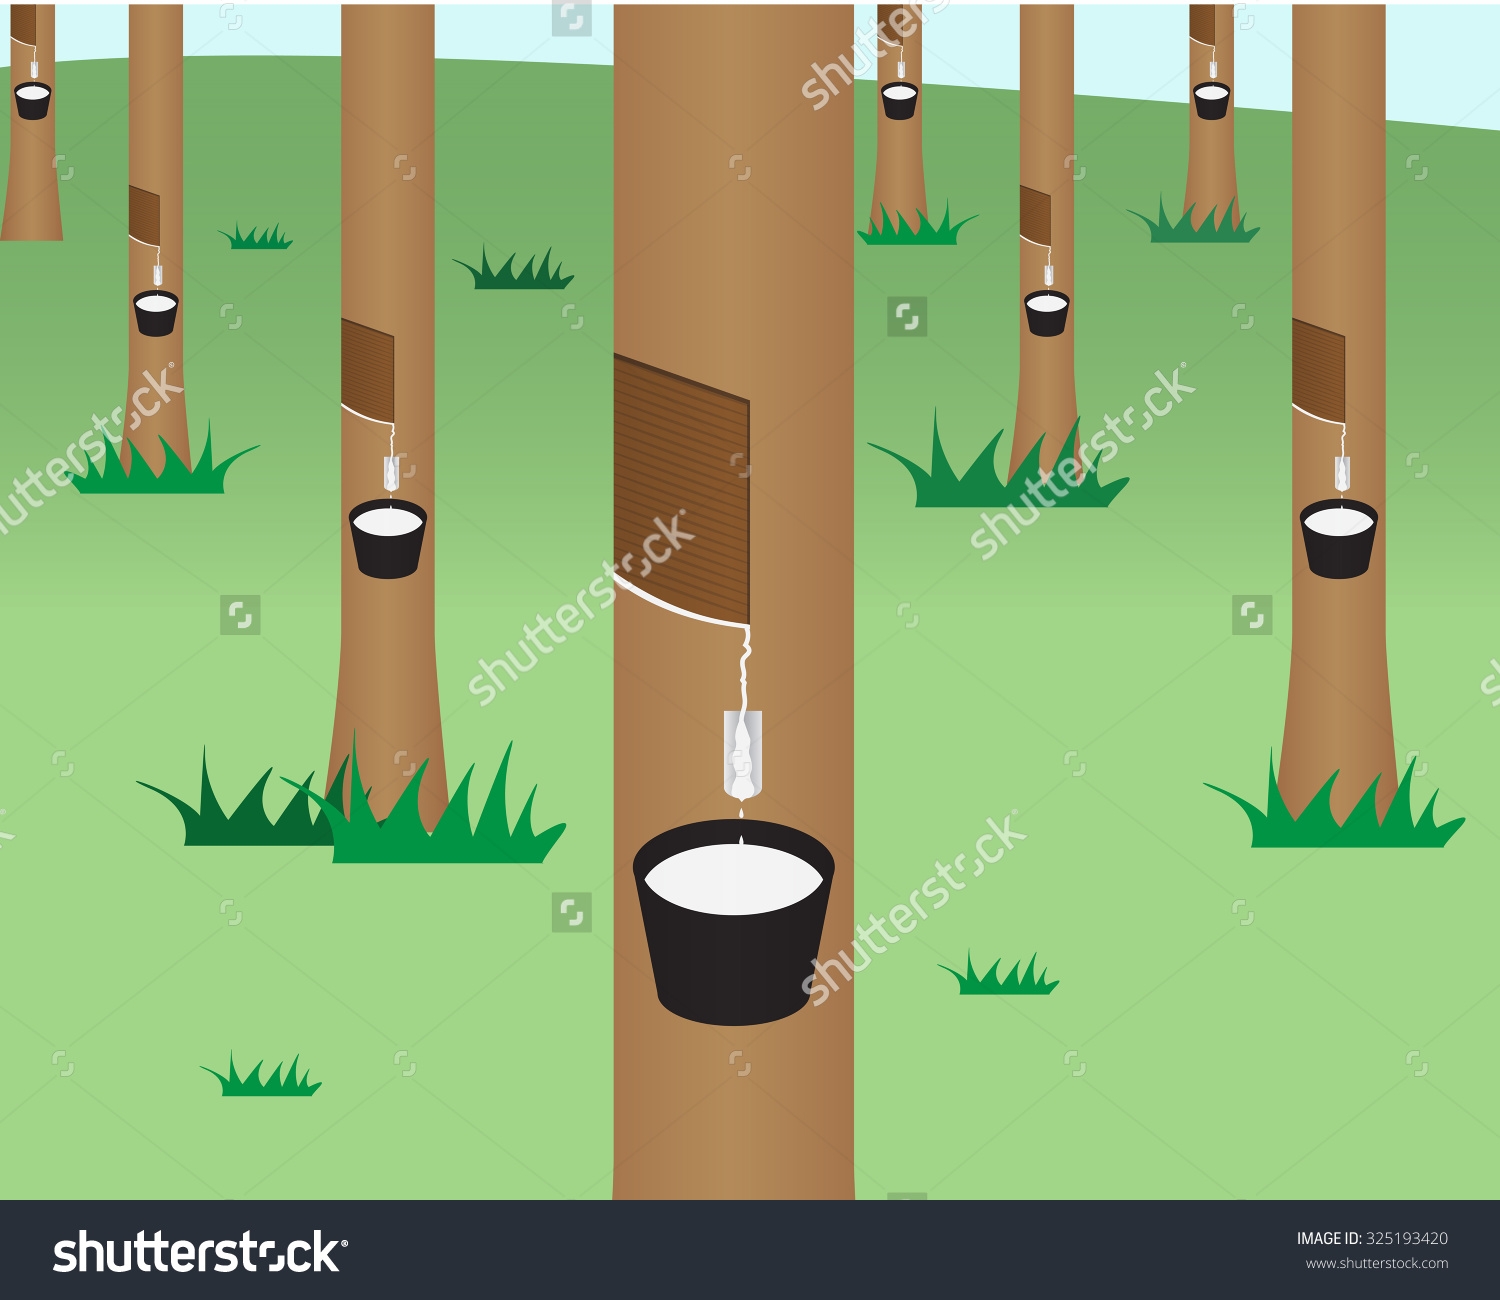 Rubber Tree Clipart.